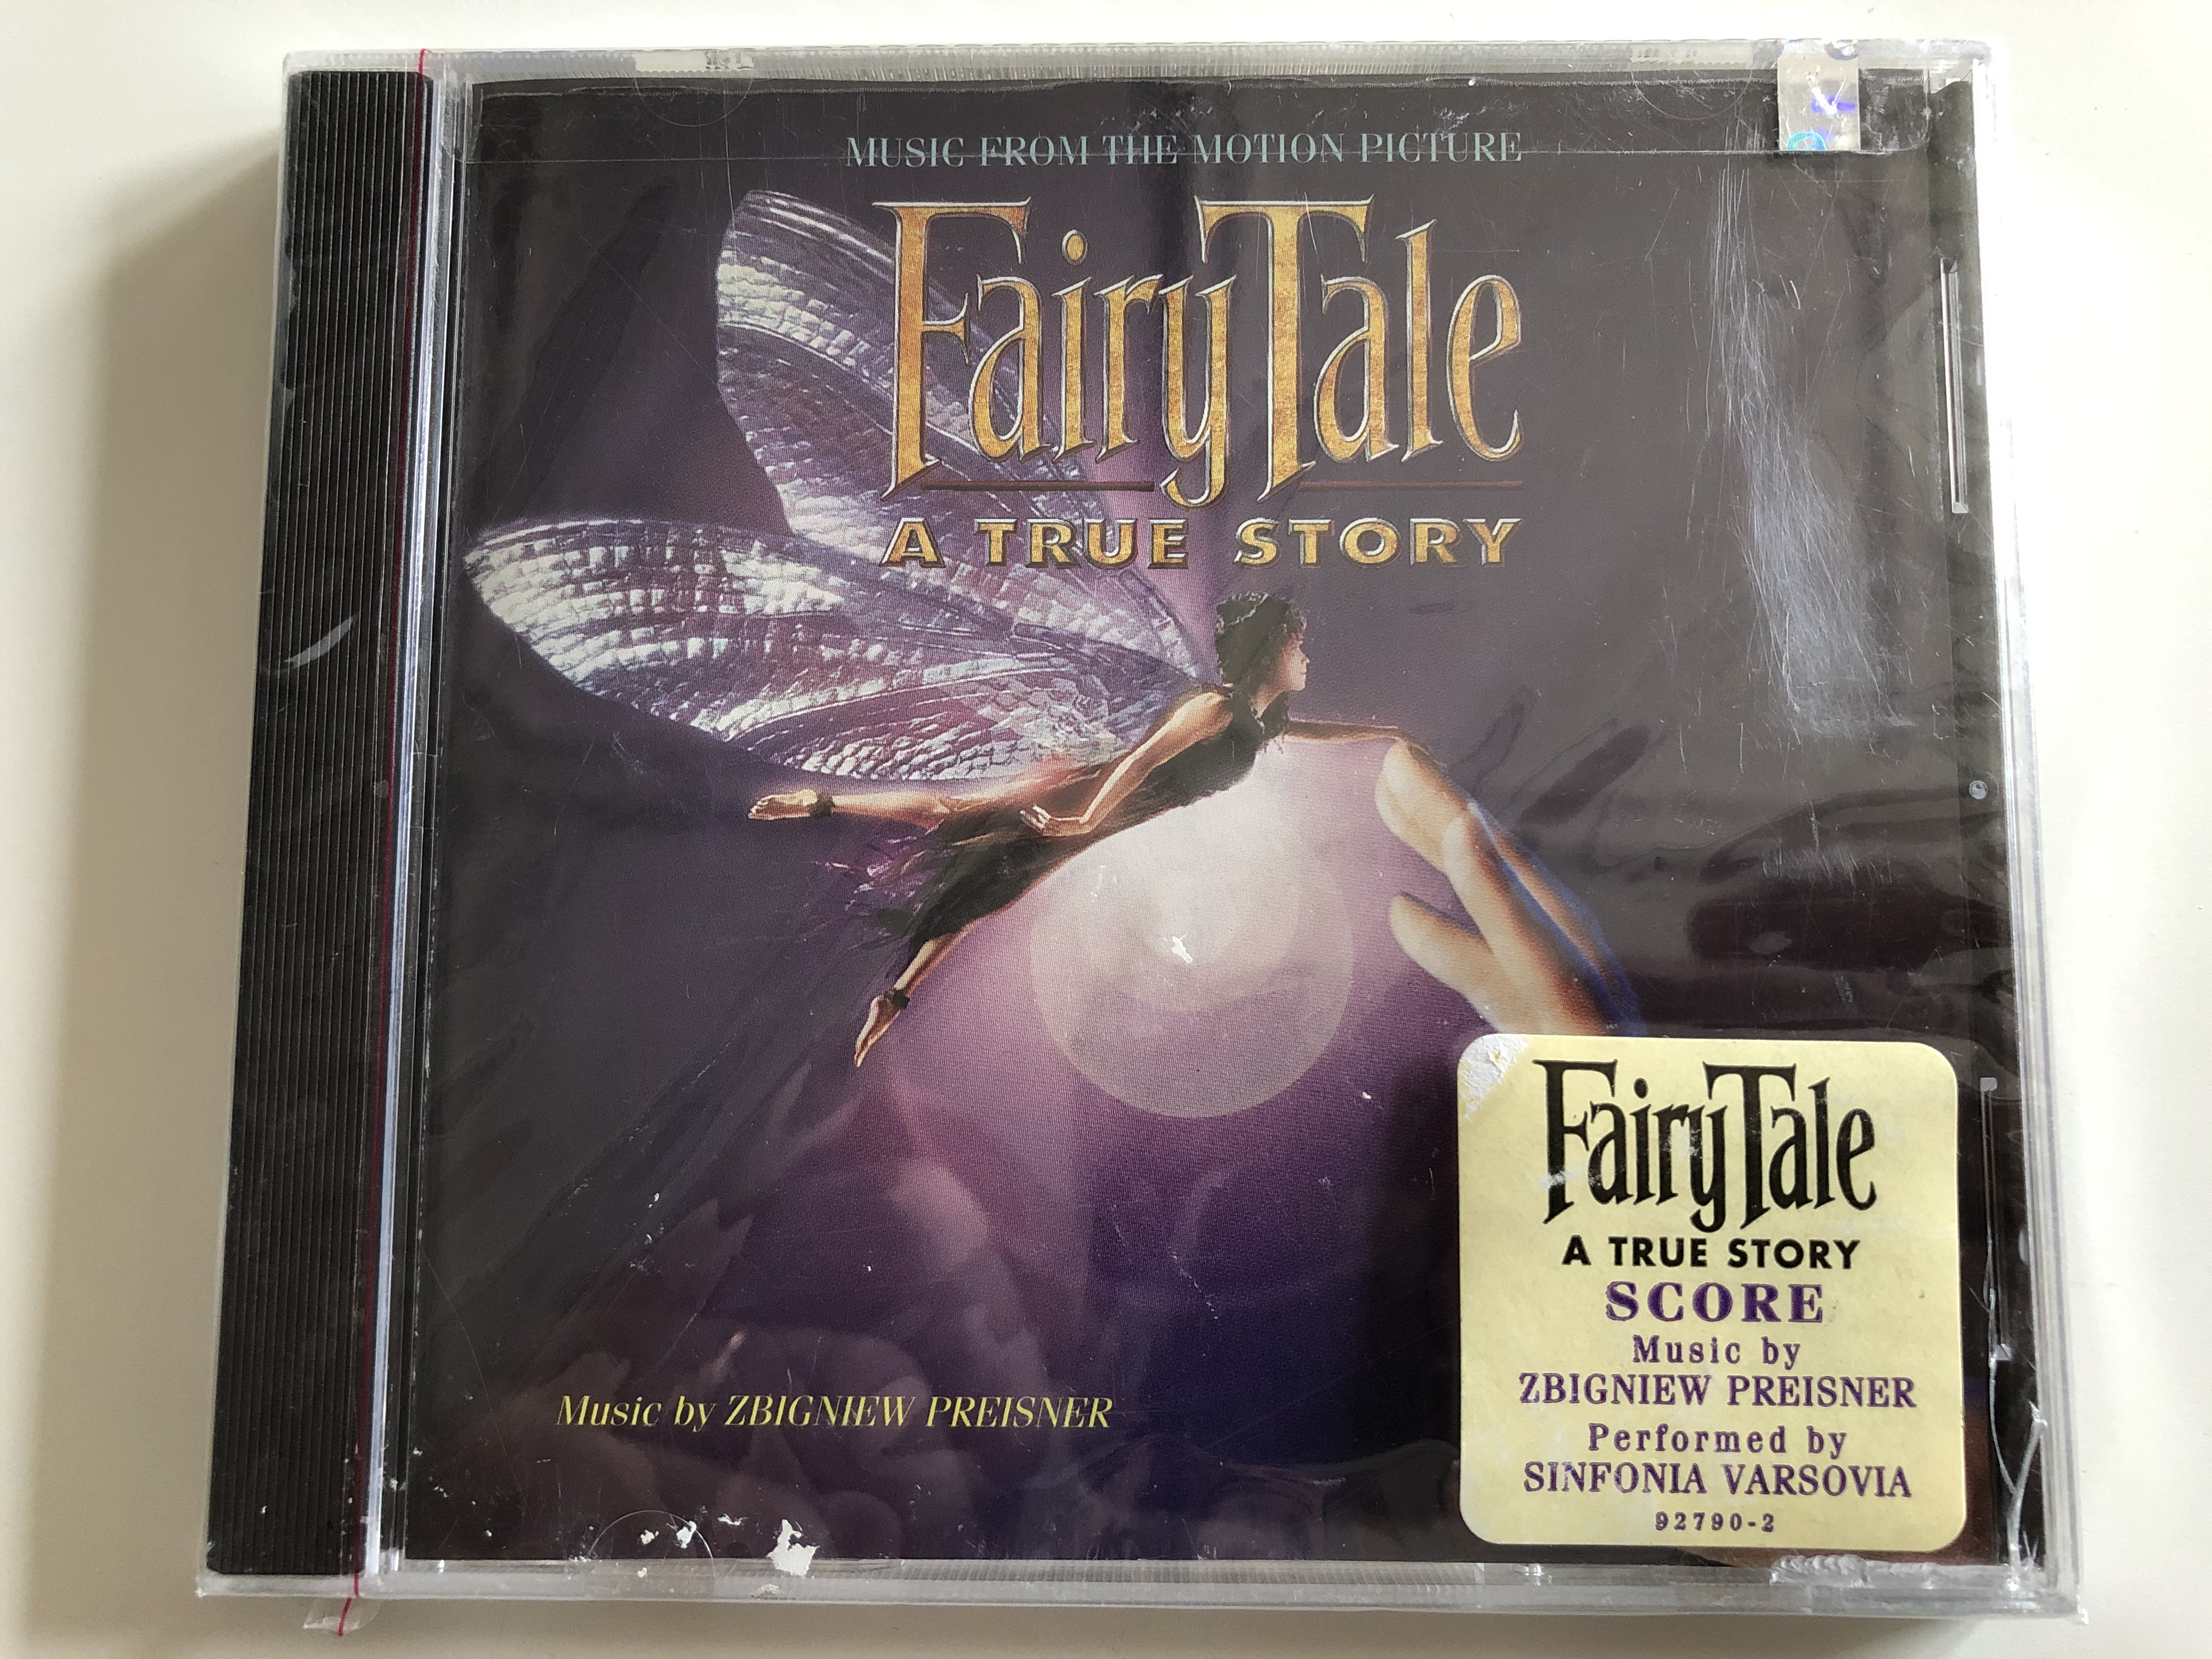 music-from-the-motion-picture-fairytale-a-true-story-music-by-zbigniew-preisner-performed-by-sinfonia-varsovia-icon-records-audio-cd-1997-92790-2-1-.jpg